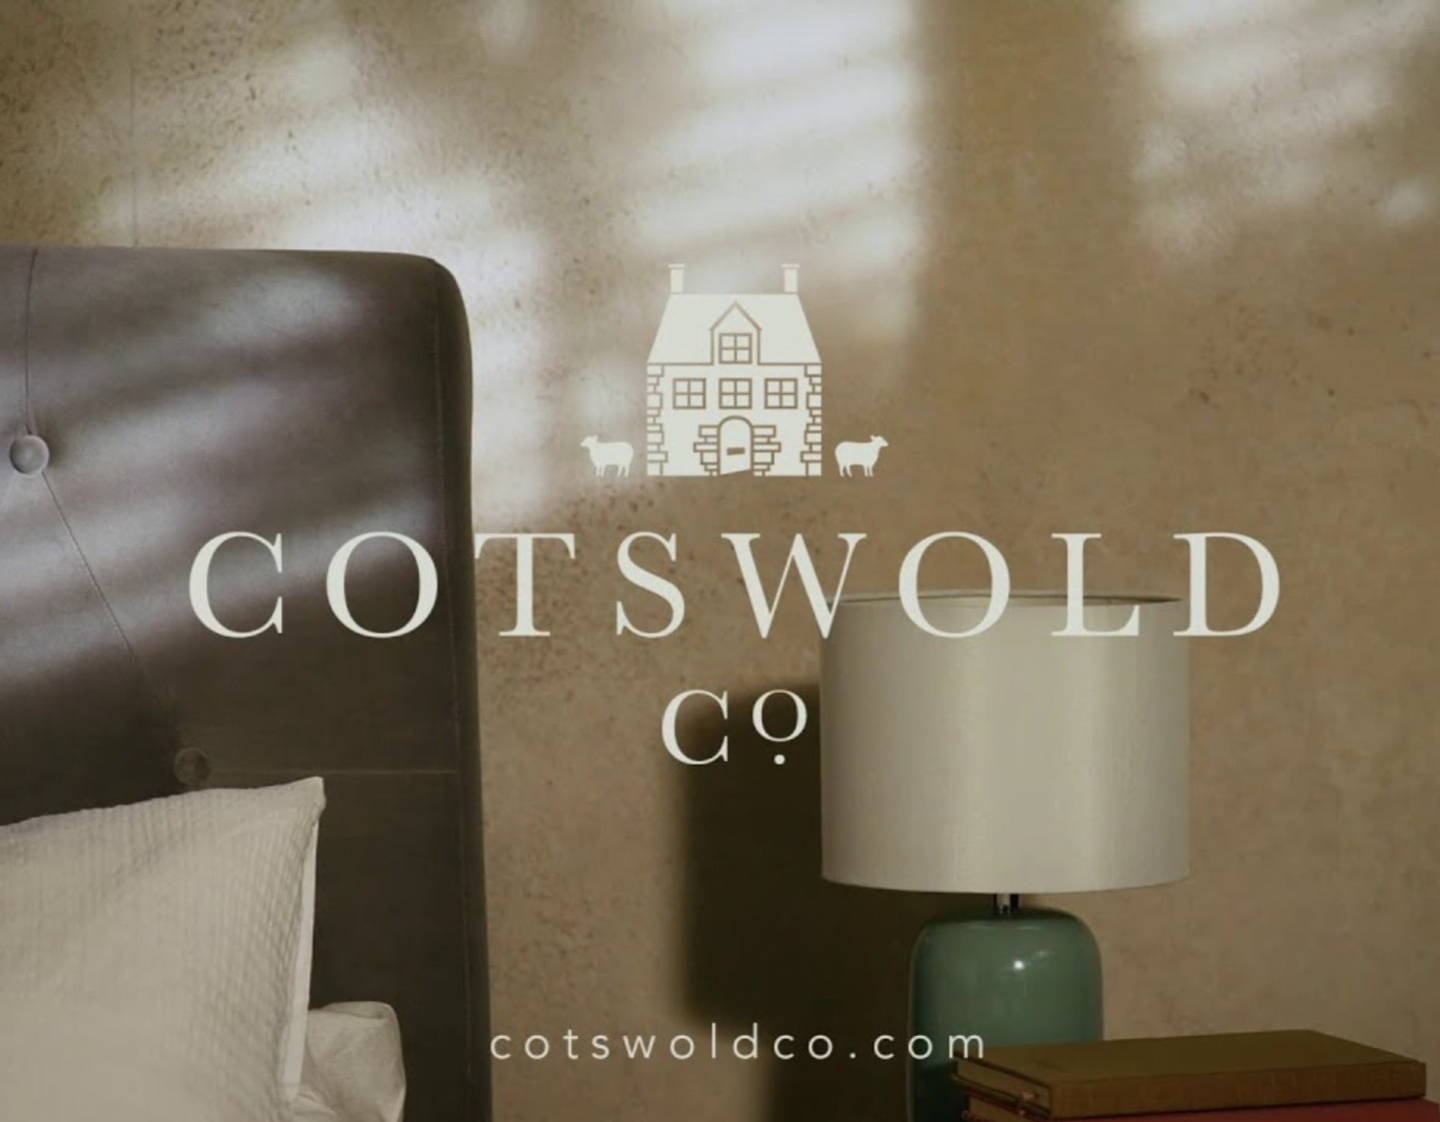 Jobs at the Cotswold Company